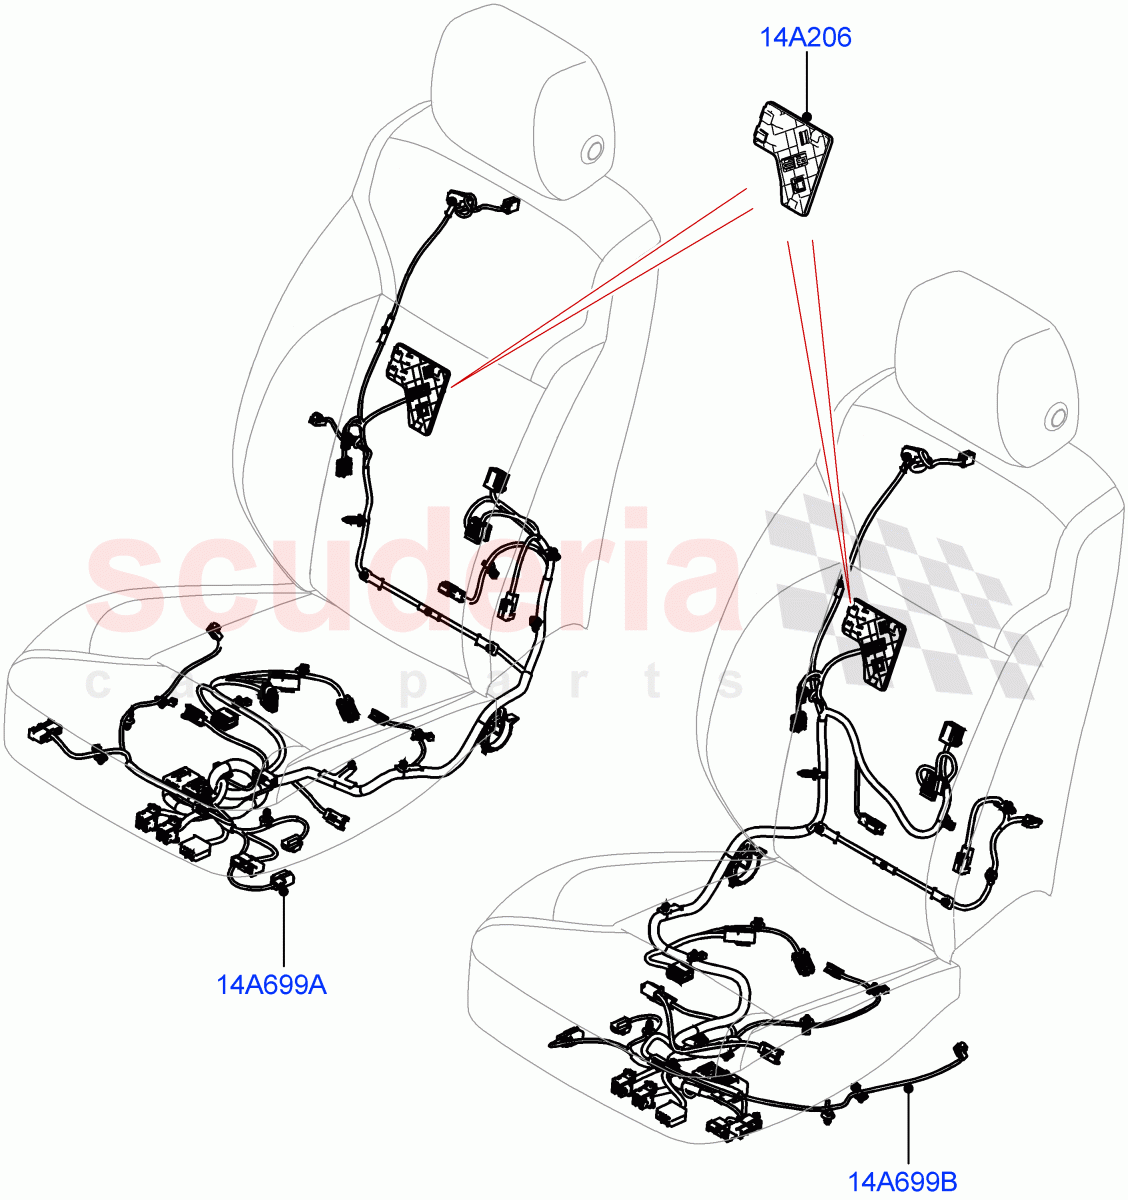 Wiring - Seats(Front Seats)((V)FROMMA000001) of Land Rover Land Rover Range Rover Velar (2017+) [3.0 DOHC GDI SC V6 Petrol]